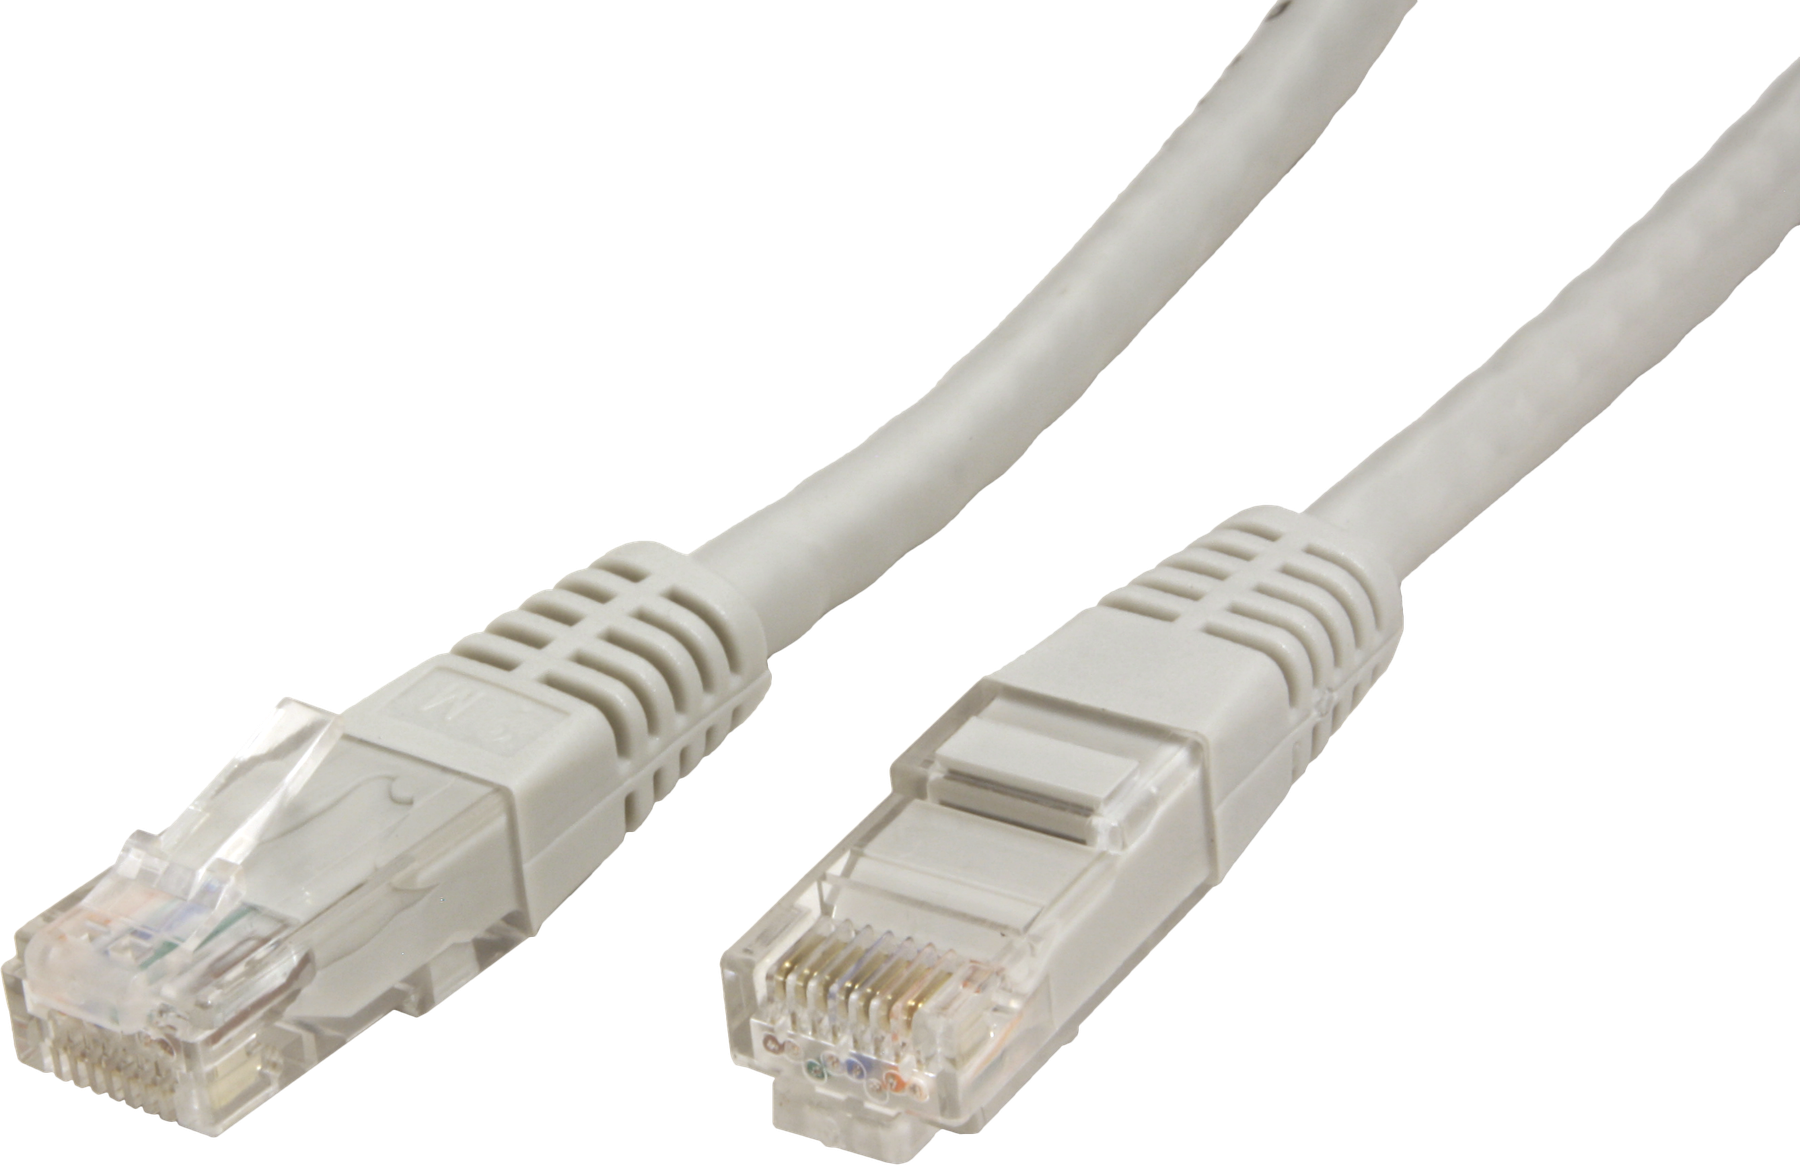 Ethernet Cable PNG Background Image